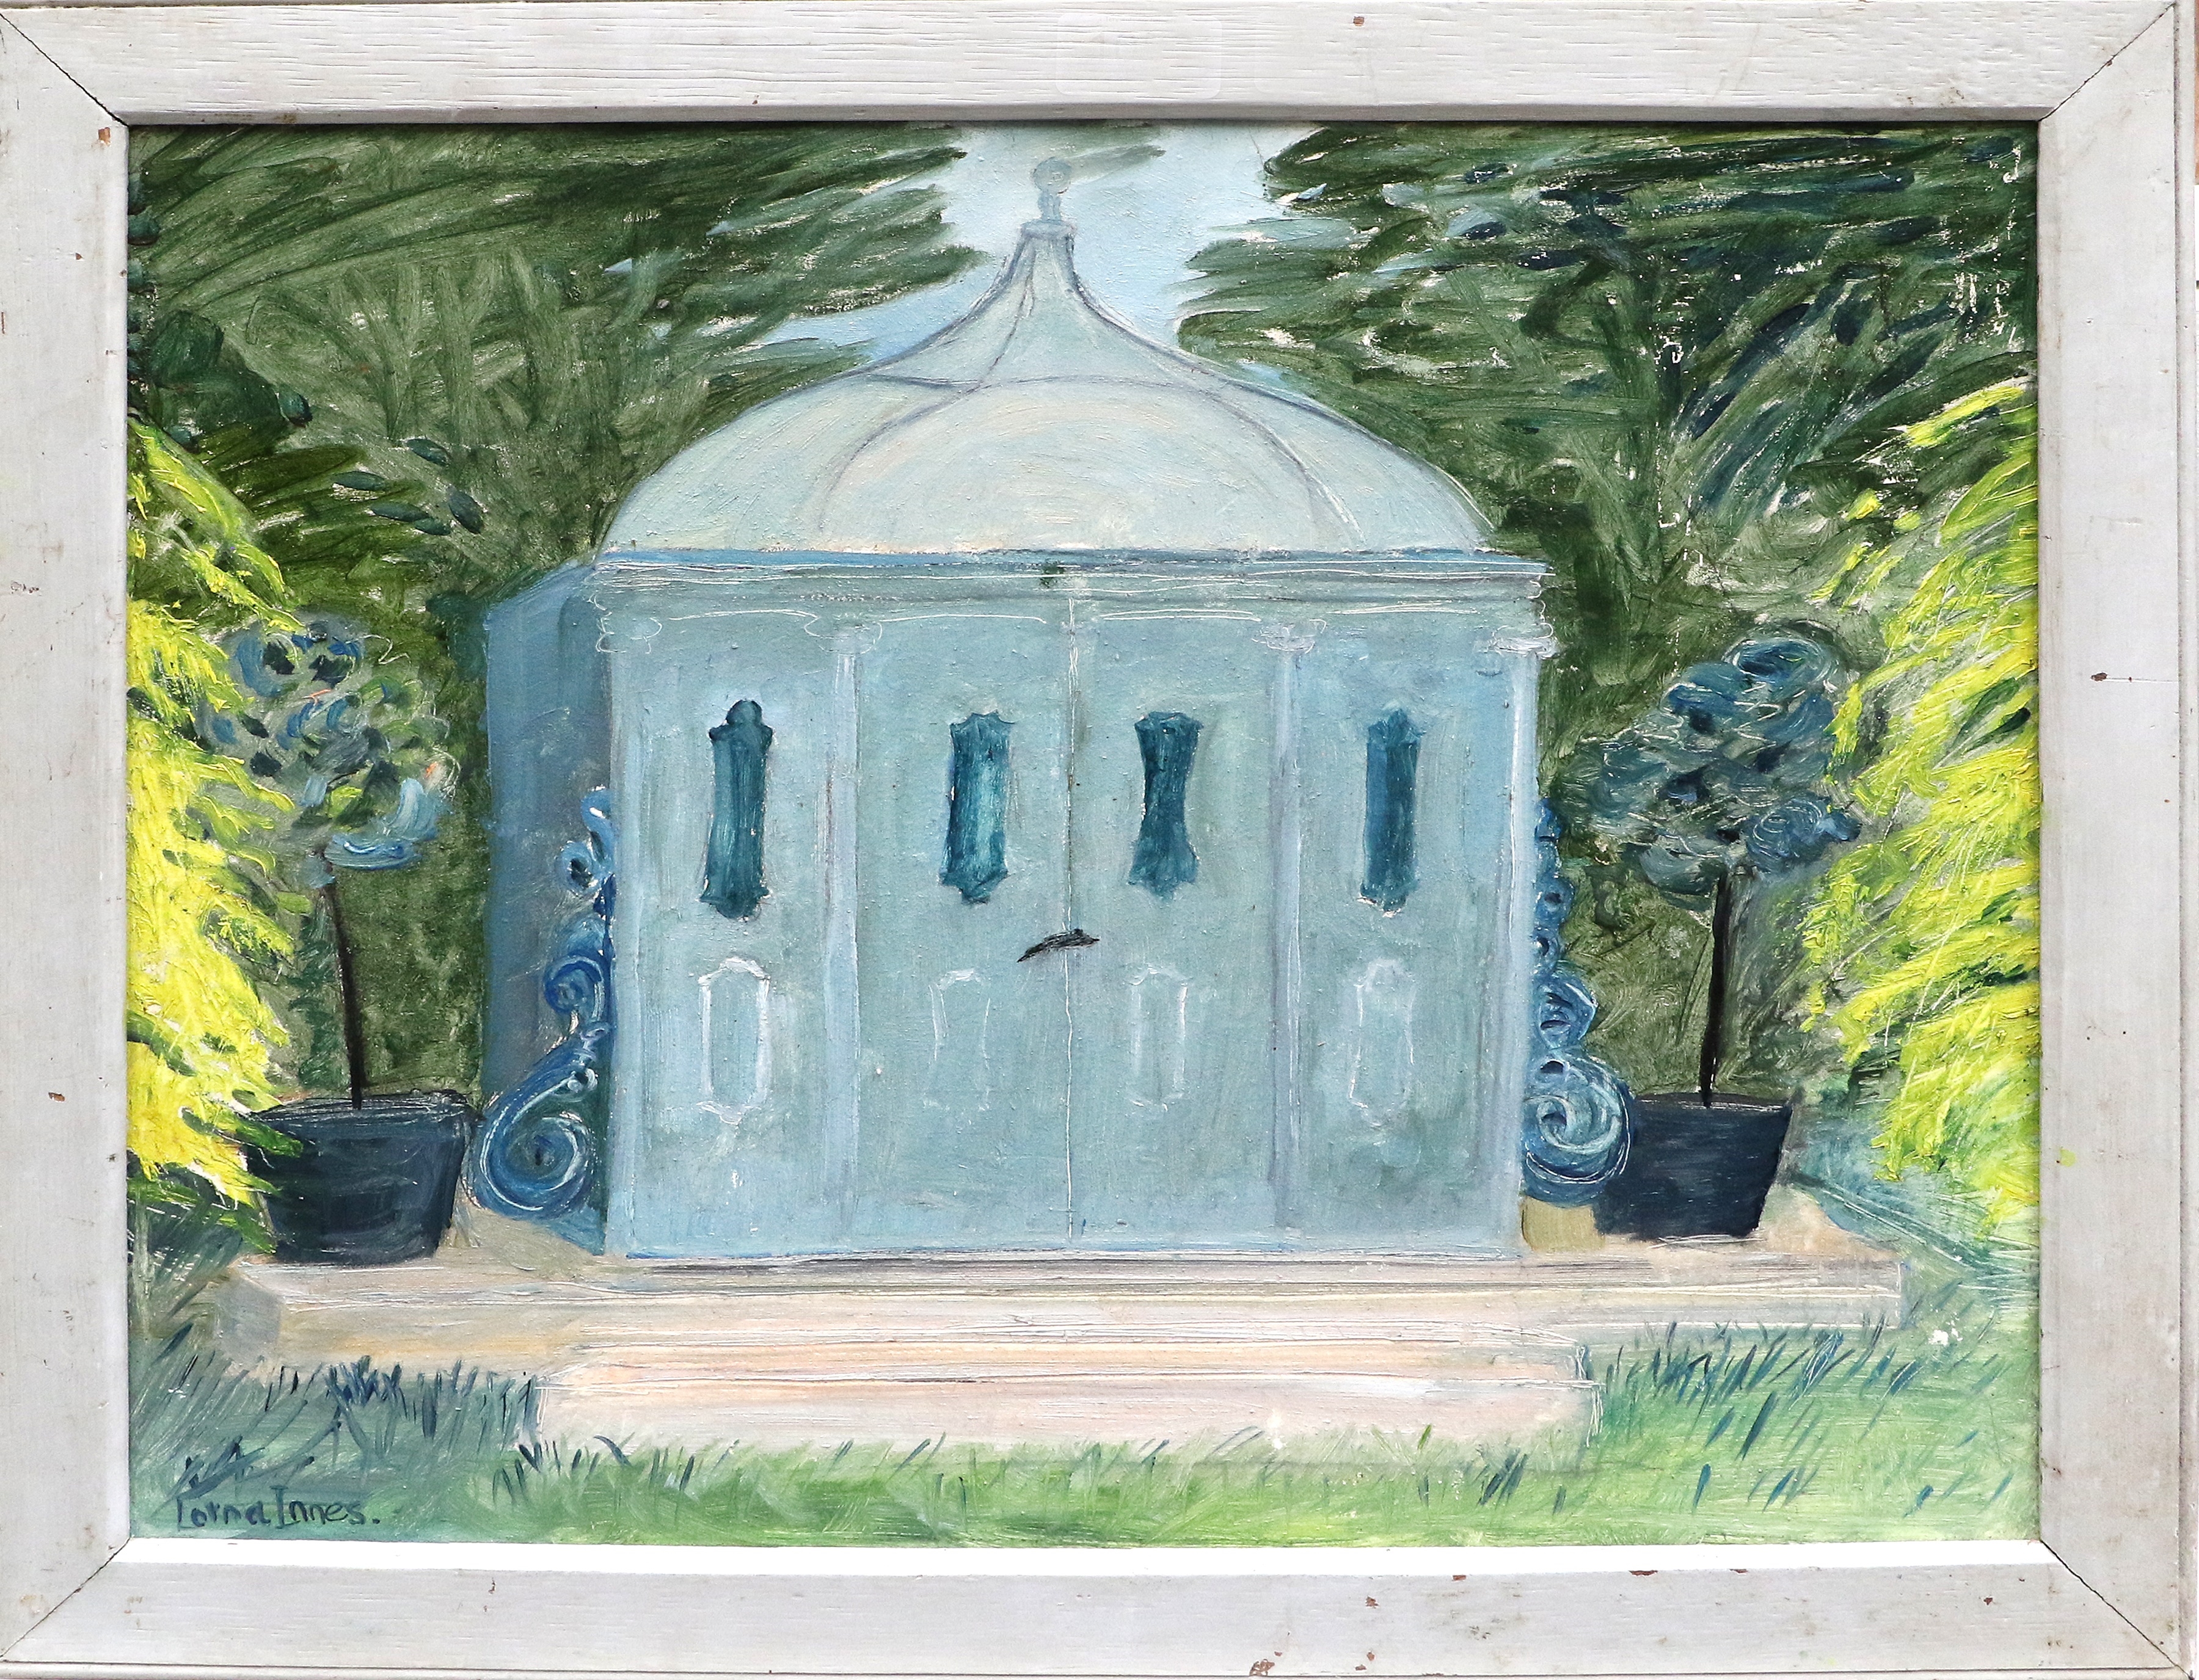 Artwork by Lorna Innes, The Blue Pavillion, Made of oil on board